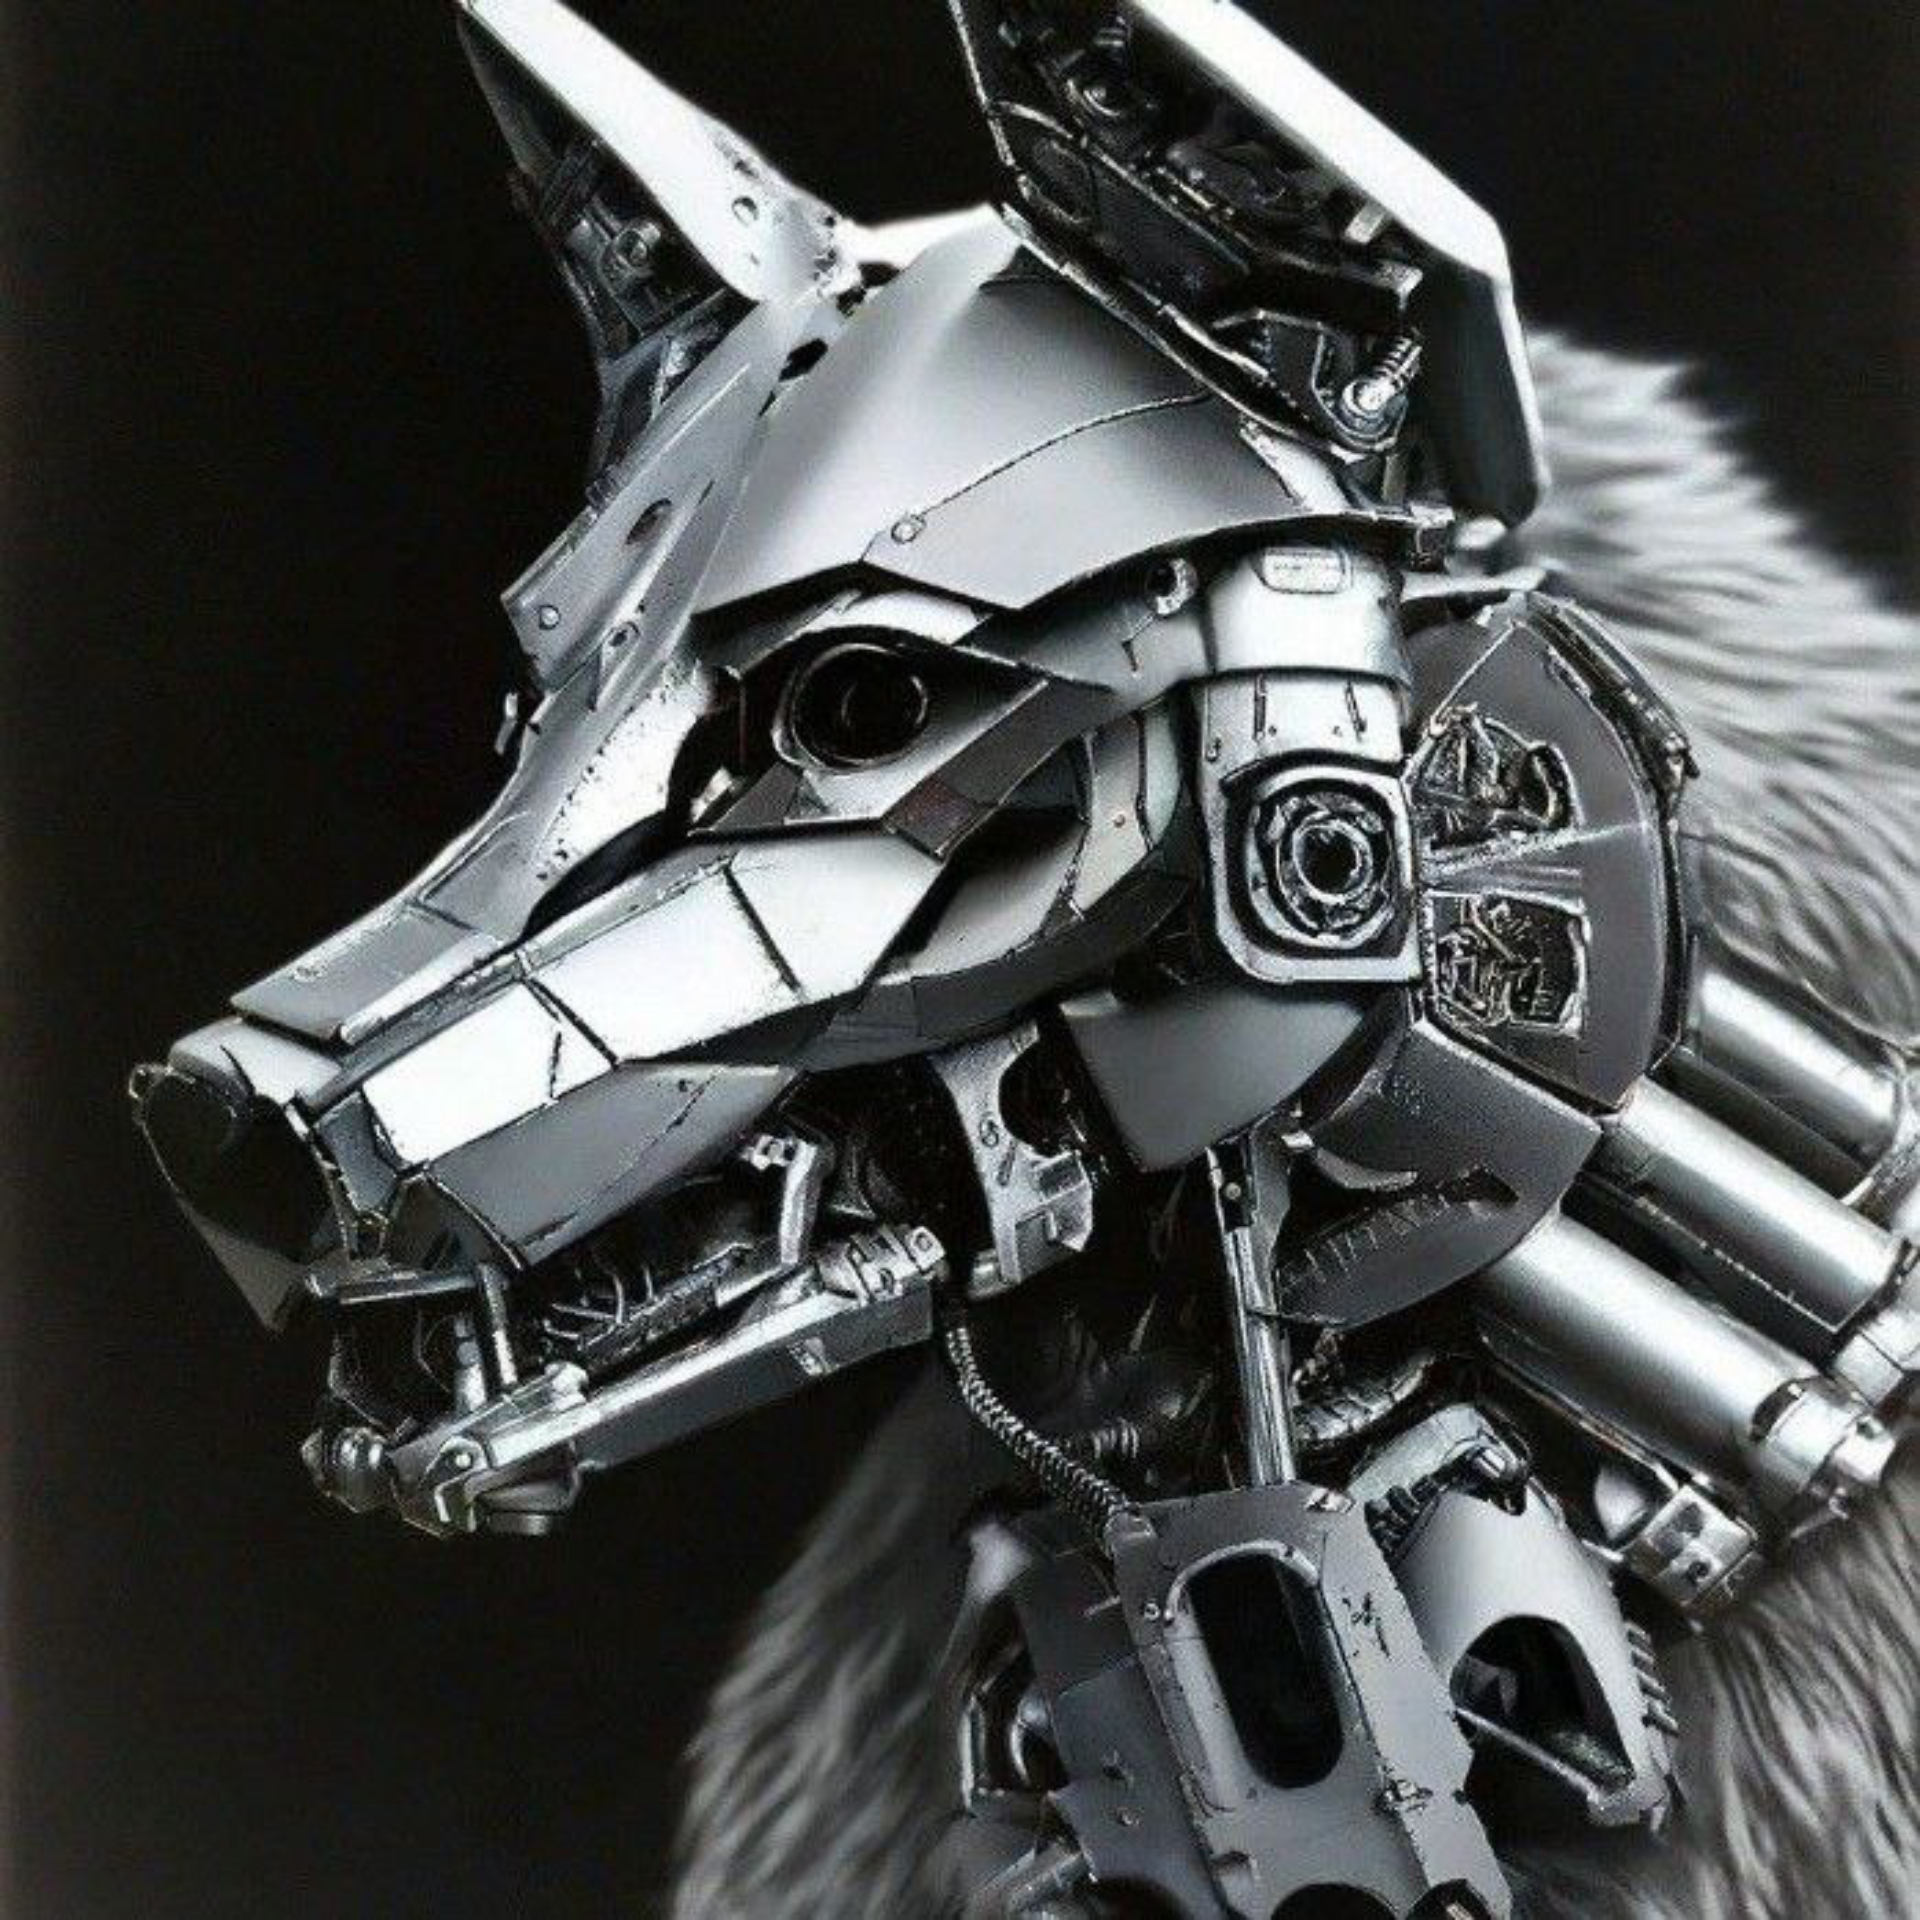 The mechanical wolf